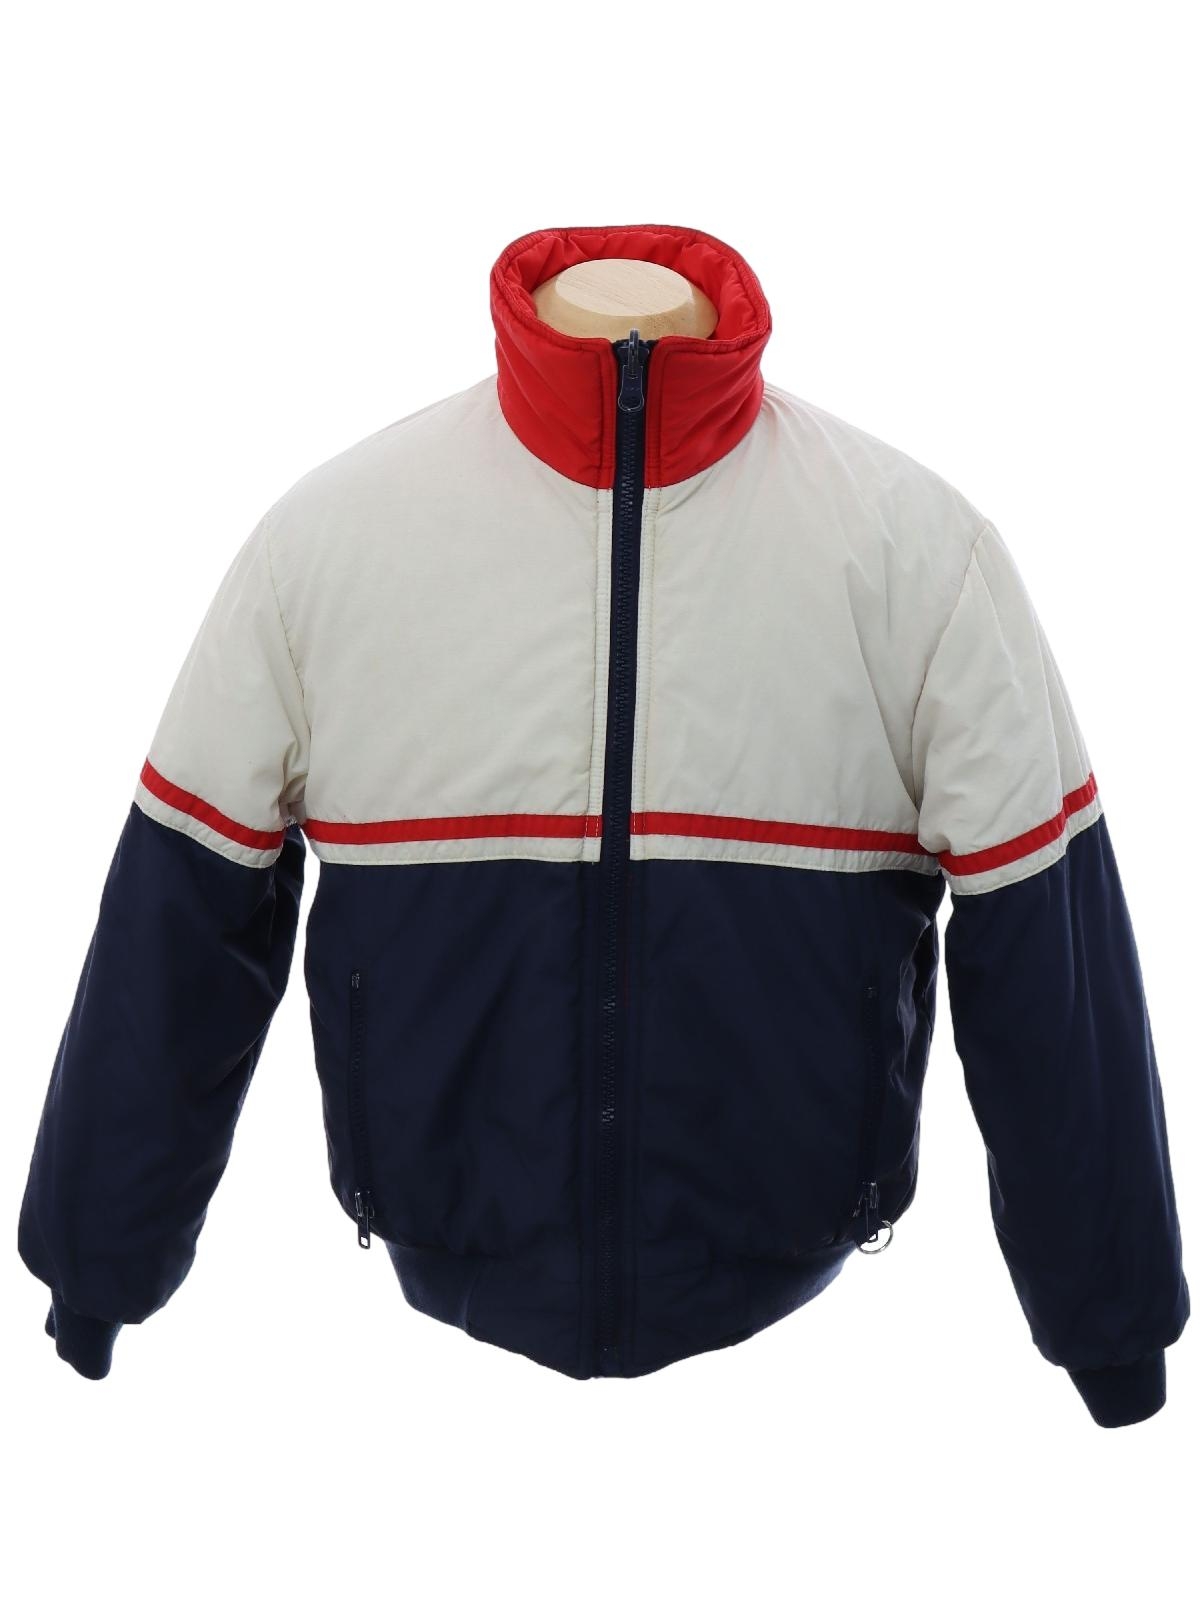 80s Retro Jacket: 80s -No Label- Unisex midnight blue, white and red ...